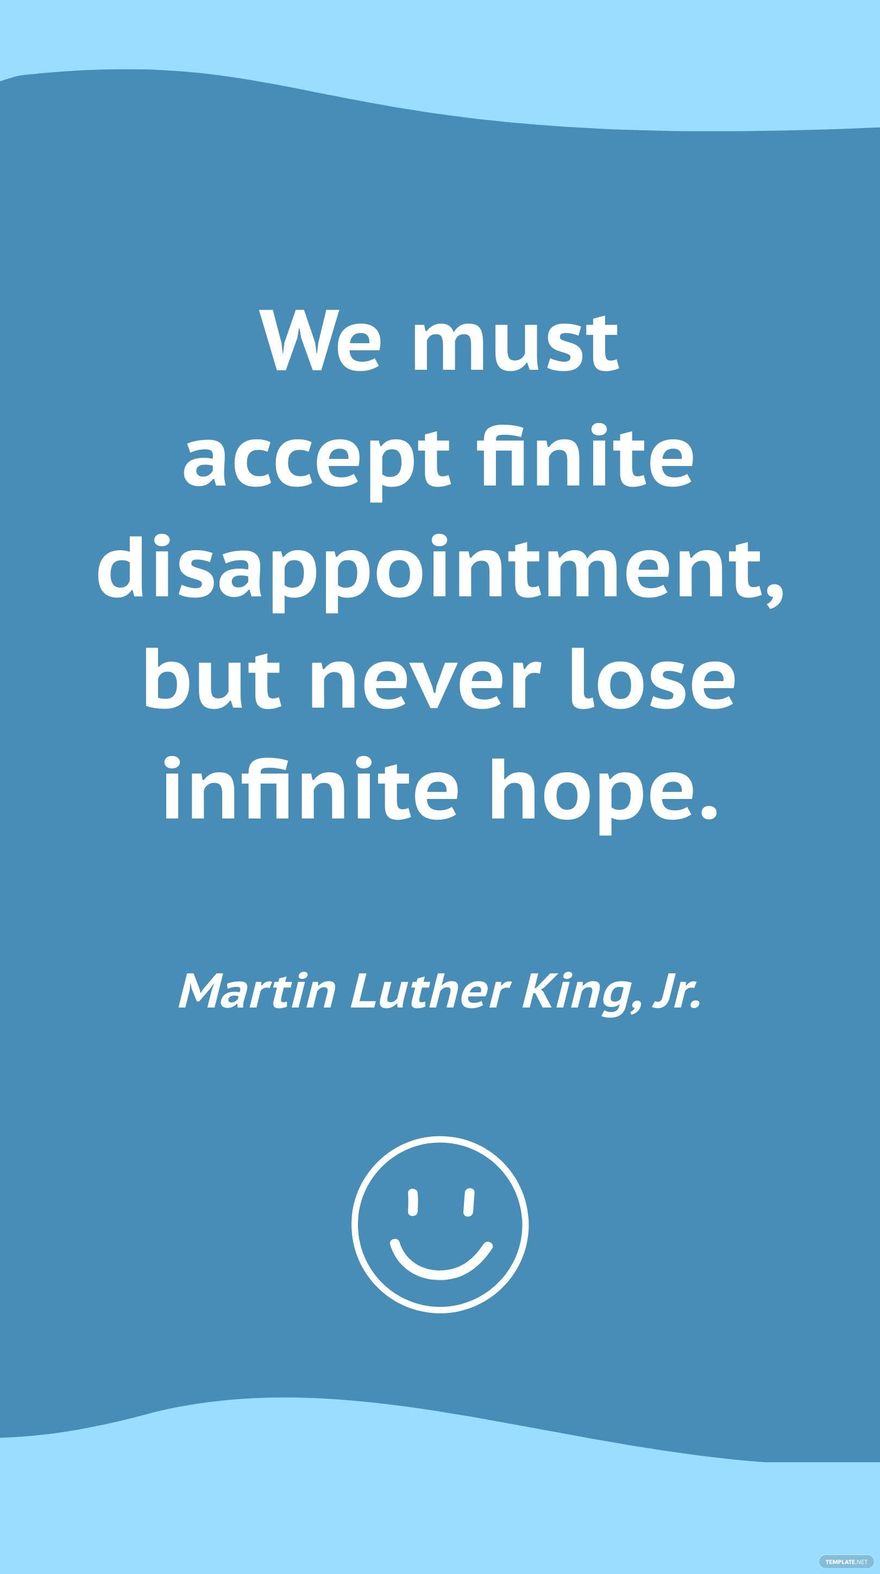 Martin Luther King, Jr. - We must accept finite disappointment, but never lose infinite hope.